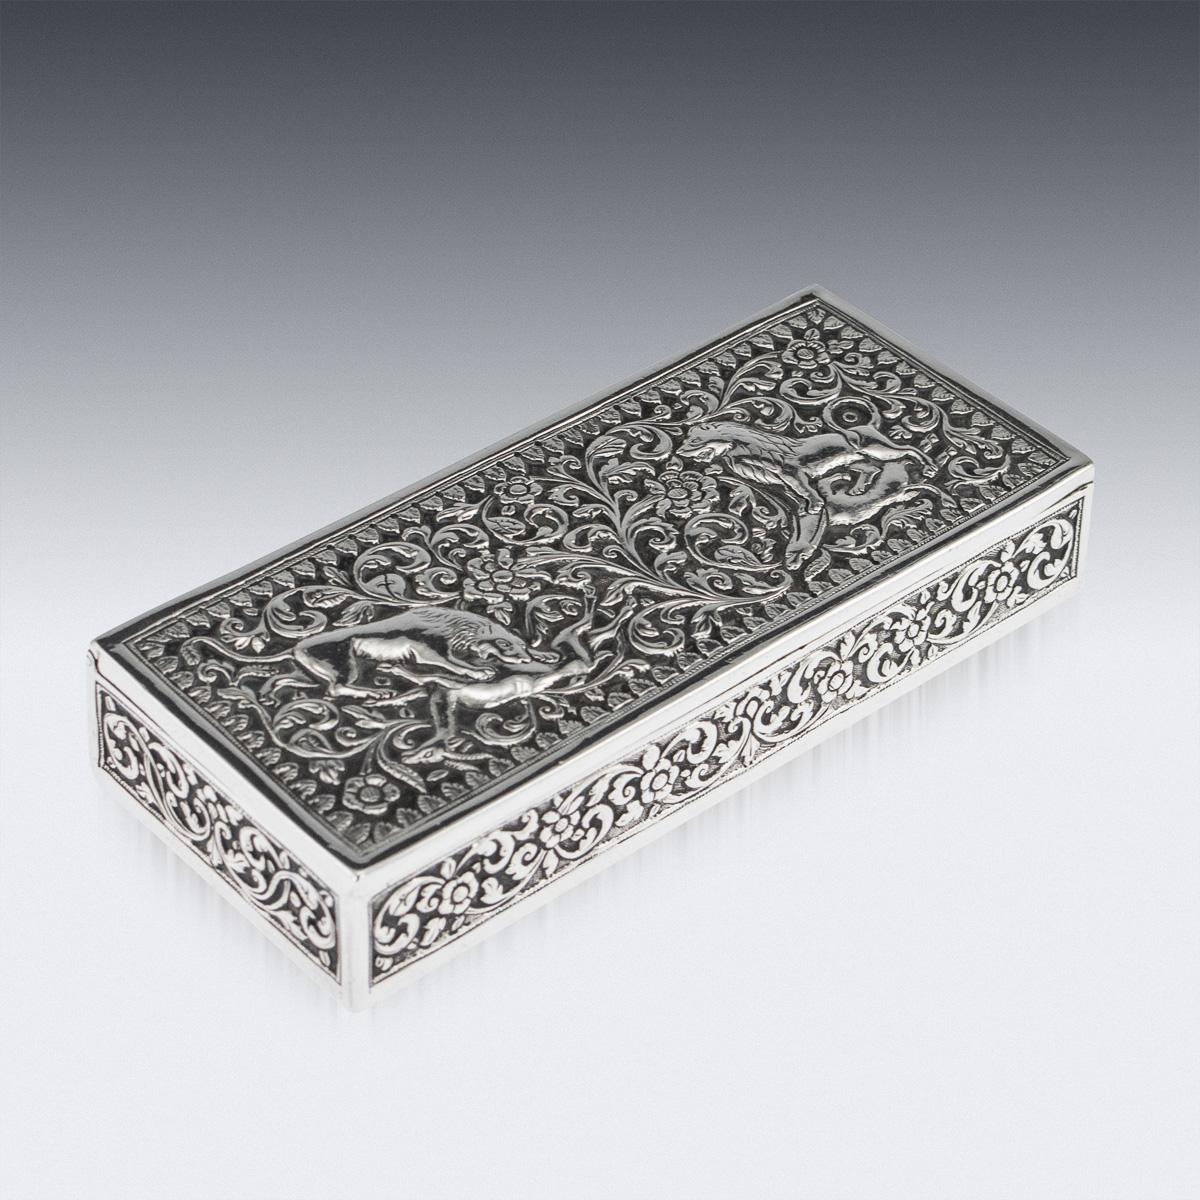 Antique late 19th century Indian Kutch (Cutch) solid silver stamp box, of octagonal form, impressively heavy gauge and exceptionally fine workmanship, the lid depicting a lion and a lioness killing an antelope, surrounded by foliate and floral